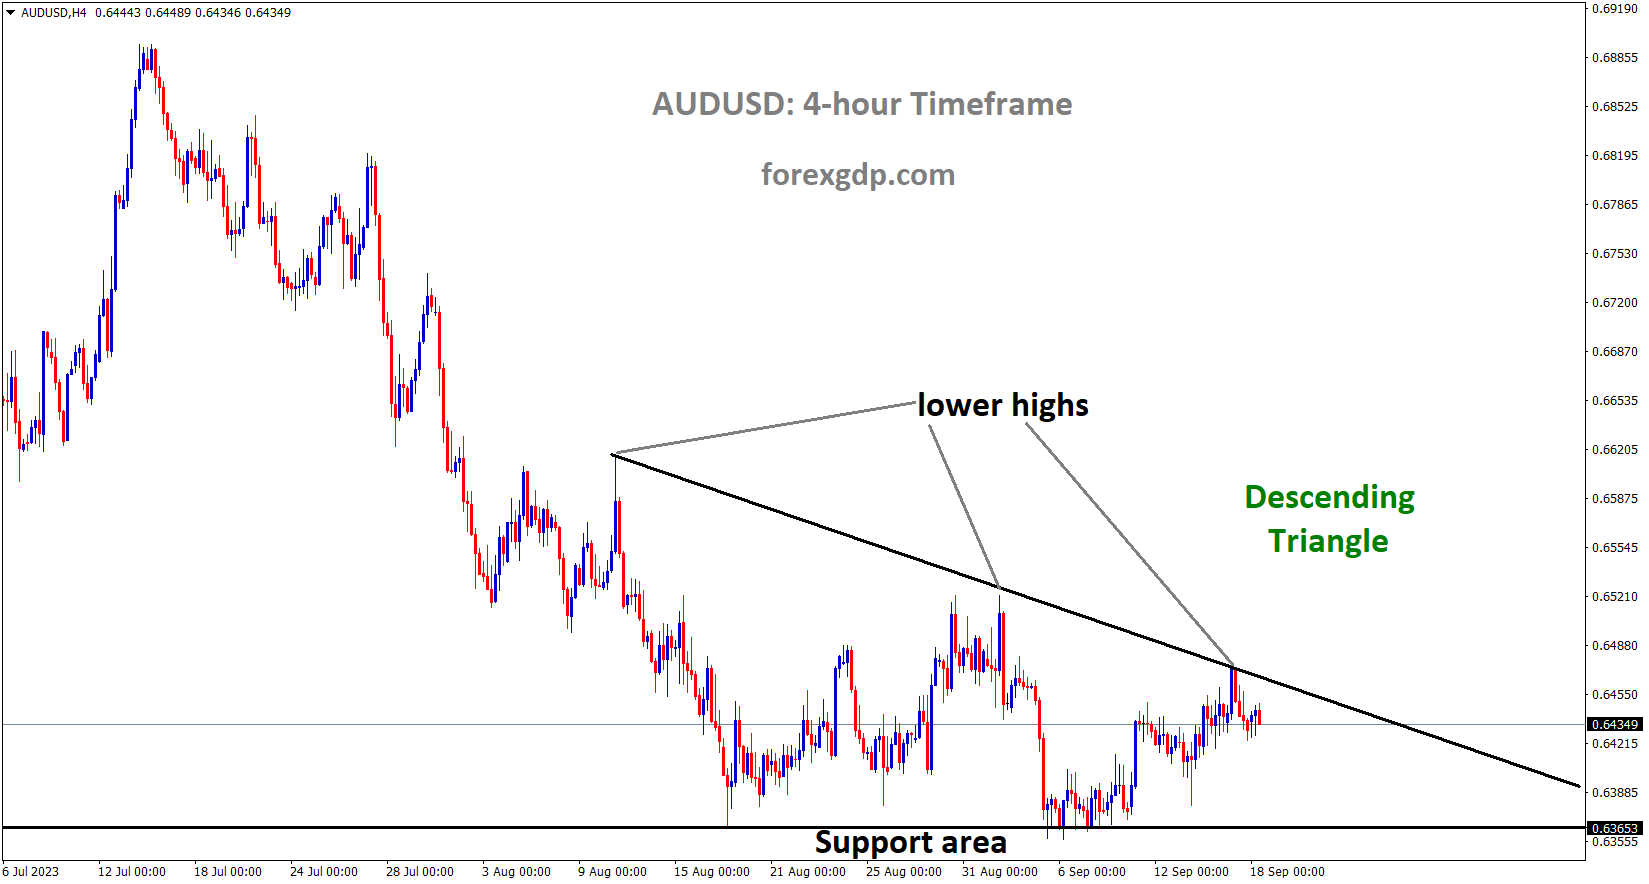 AUDUSD is moving in the Descending triangle pattern and the market has fallen from the lower high area of the pattern